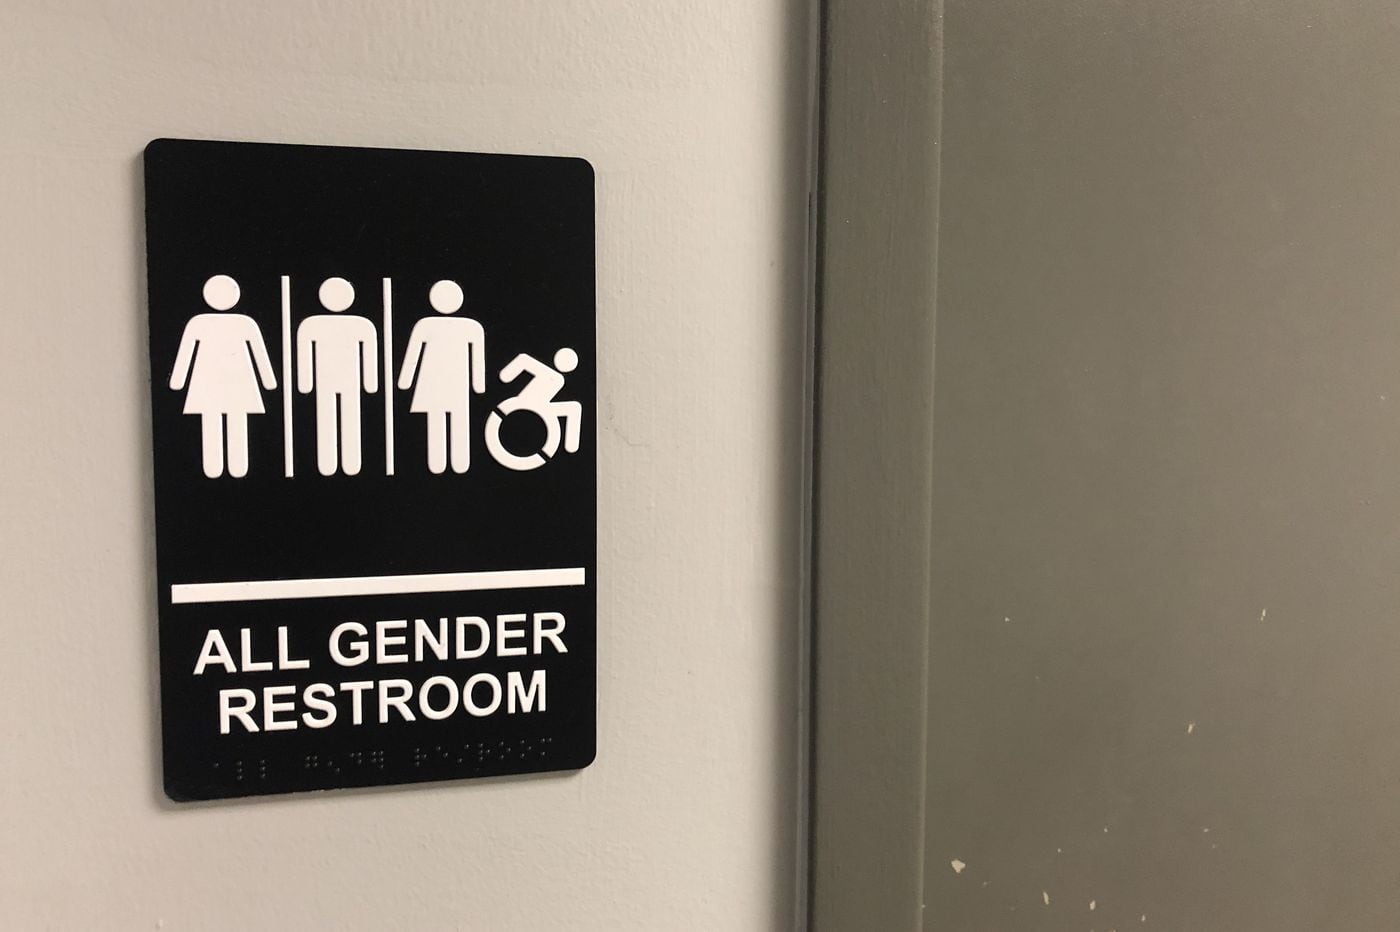 Here We Go: So-Called Christian Leaders, President Obama, and President Trump Have Failed America. Interestingly, One Day After the Falwell Jr Fiasco, Virginia School’s Transgender Bathroom Ban is Ruled Unconstitutional